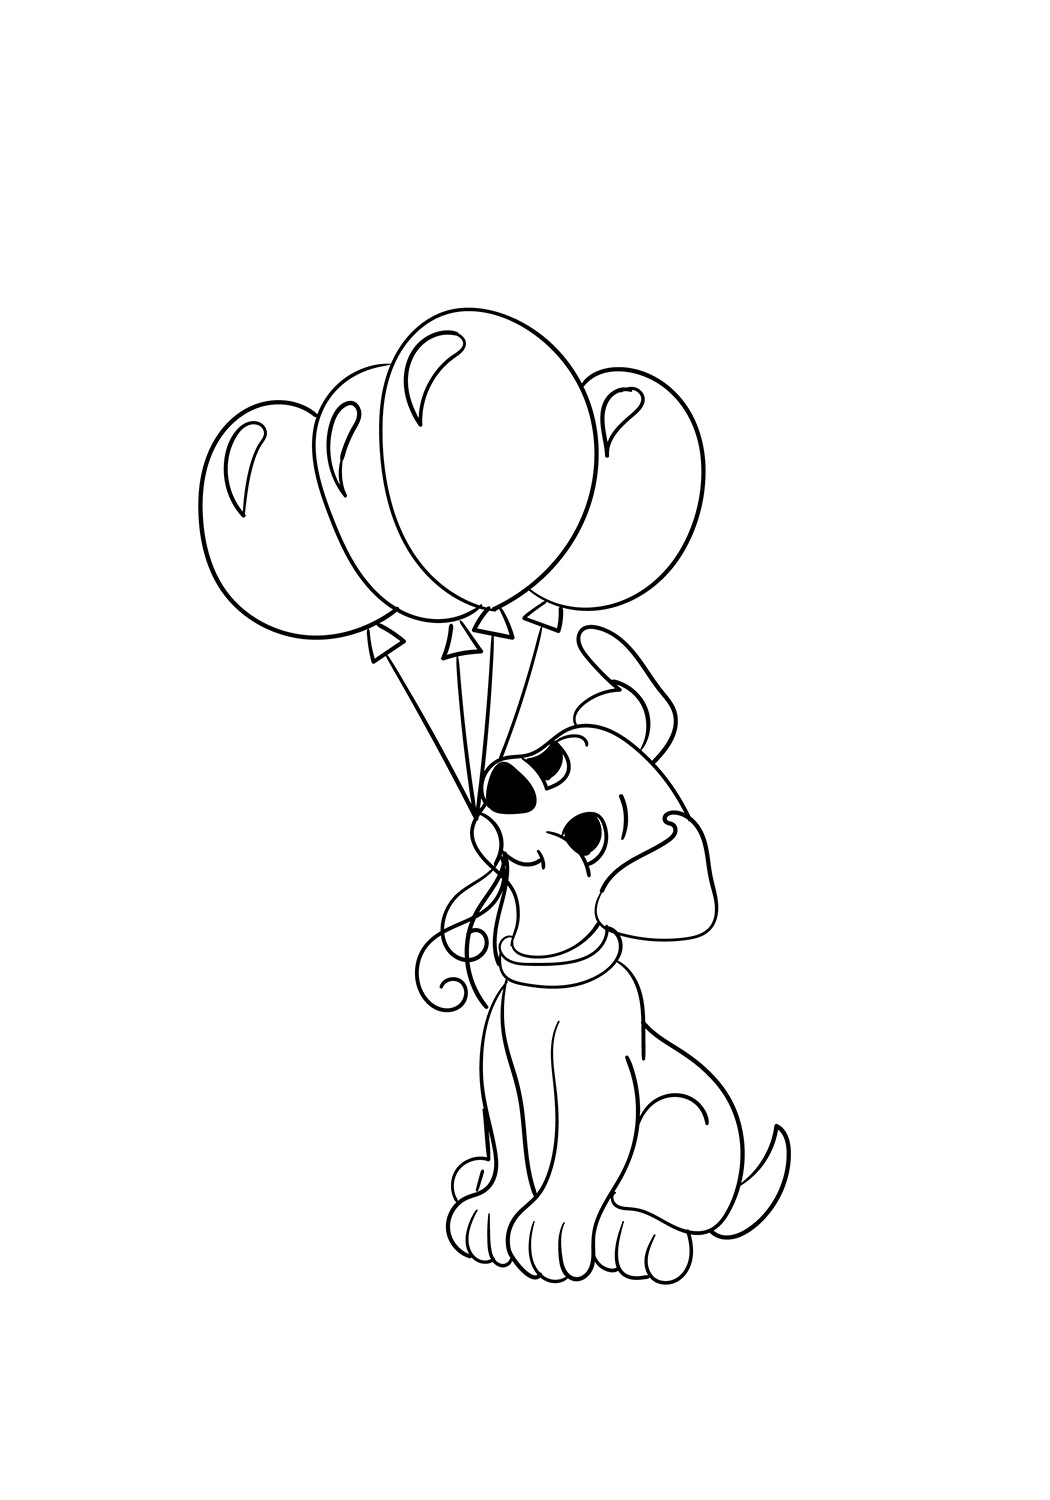 Puppy With Balloons Coloring Page